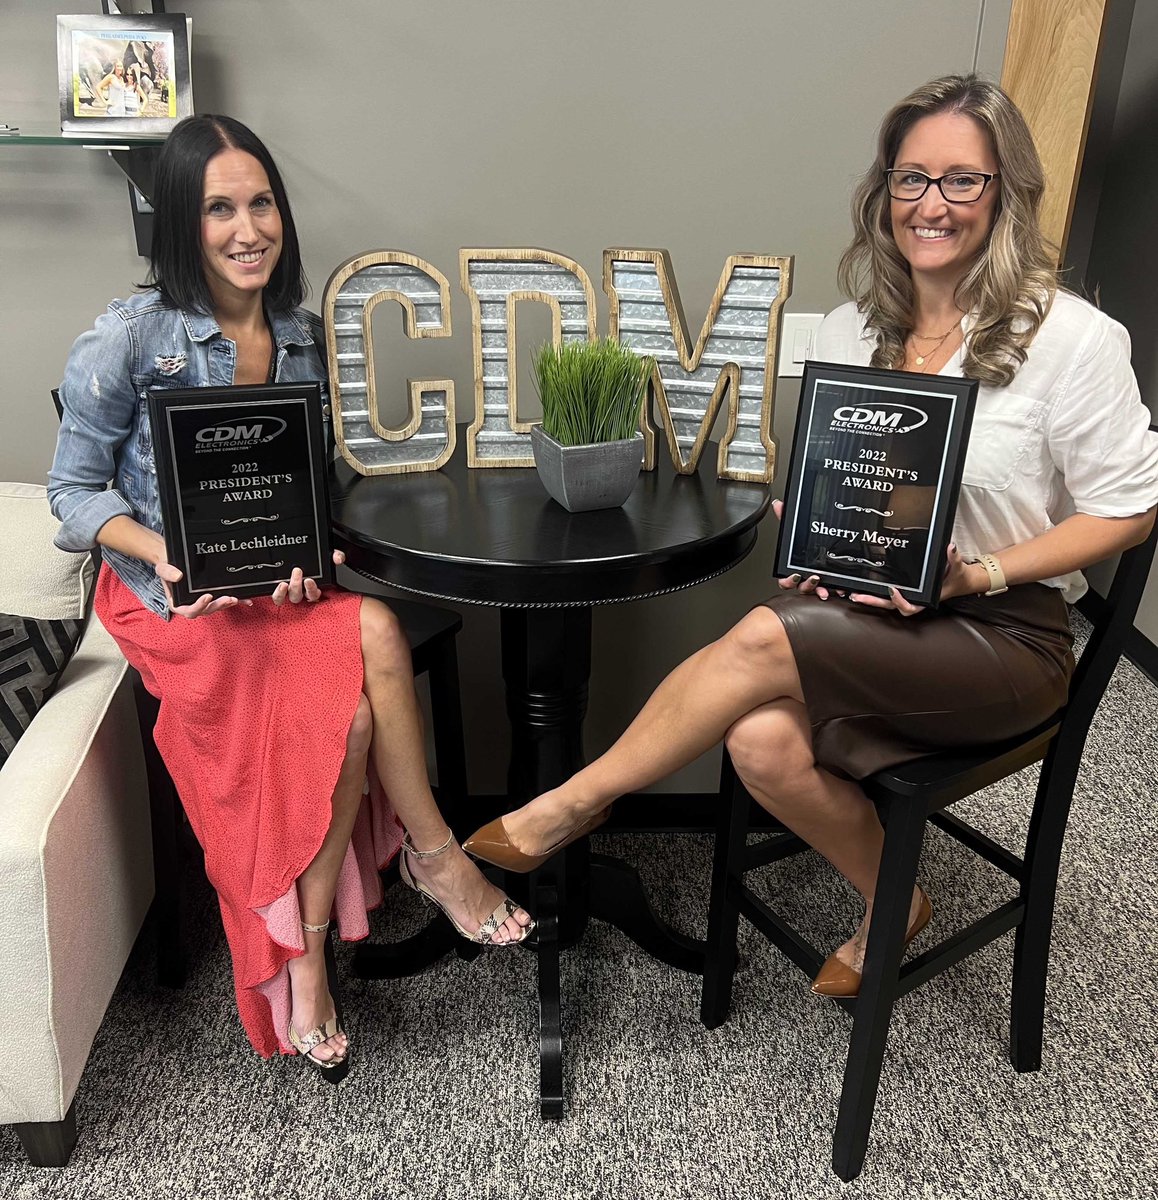 CDM Electronics congratulates President’s Award winners Kate Lechleidner (left) and Sherry Meyer (right.) Well earned for an exceptional year of customer focus! #CustomerService #PresidentsAward